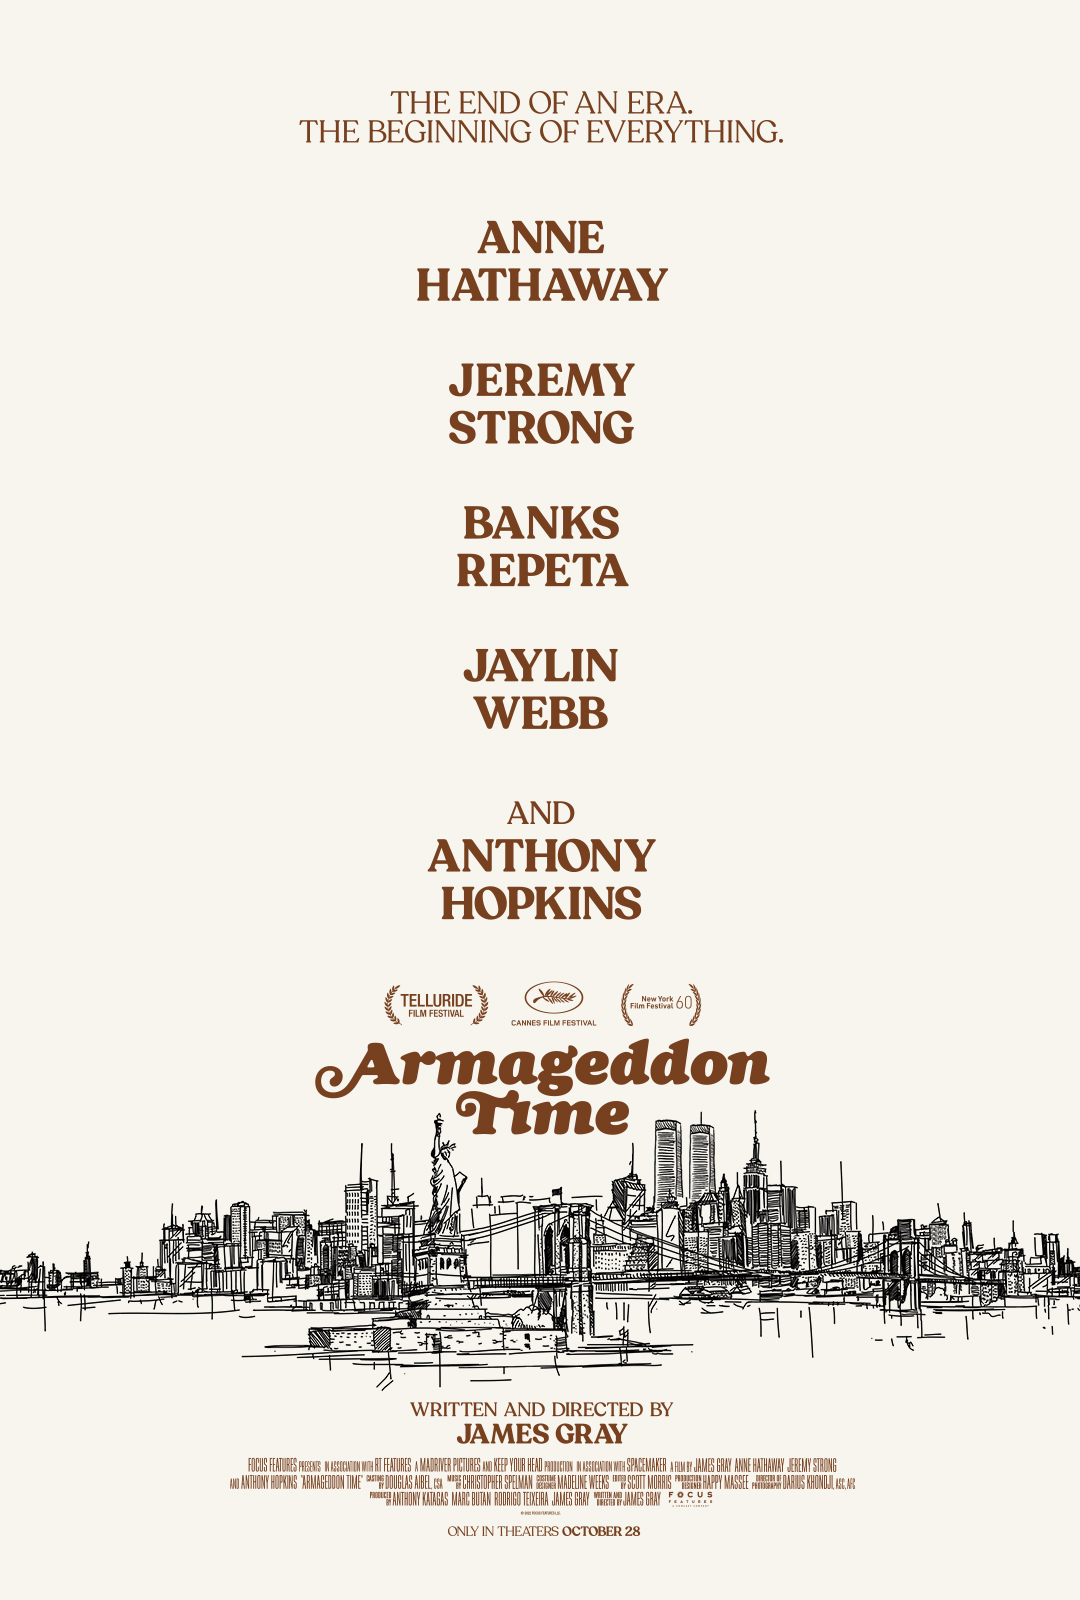 Armageddon Time trailer & poster met Anna Hathaway & Anthony Hopkins